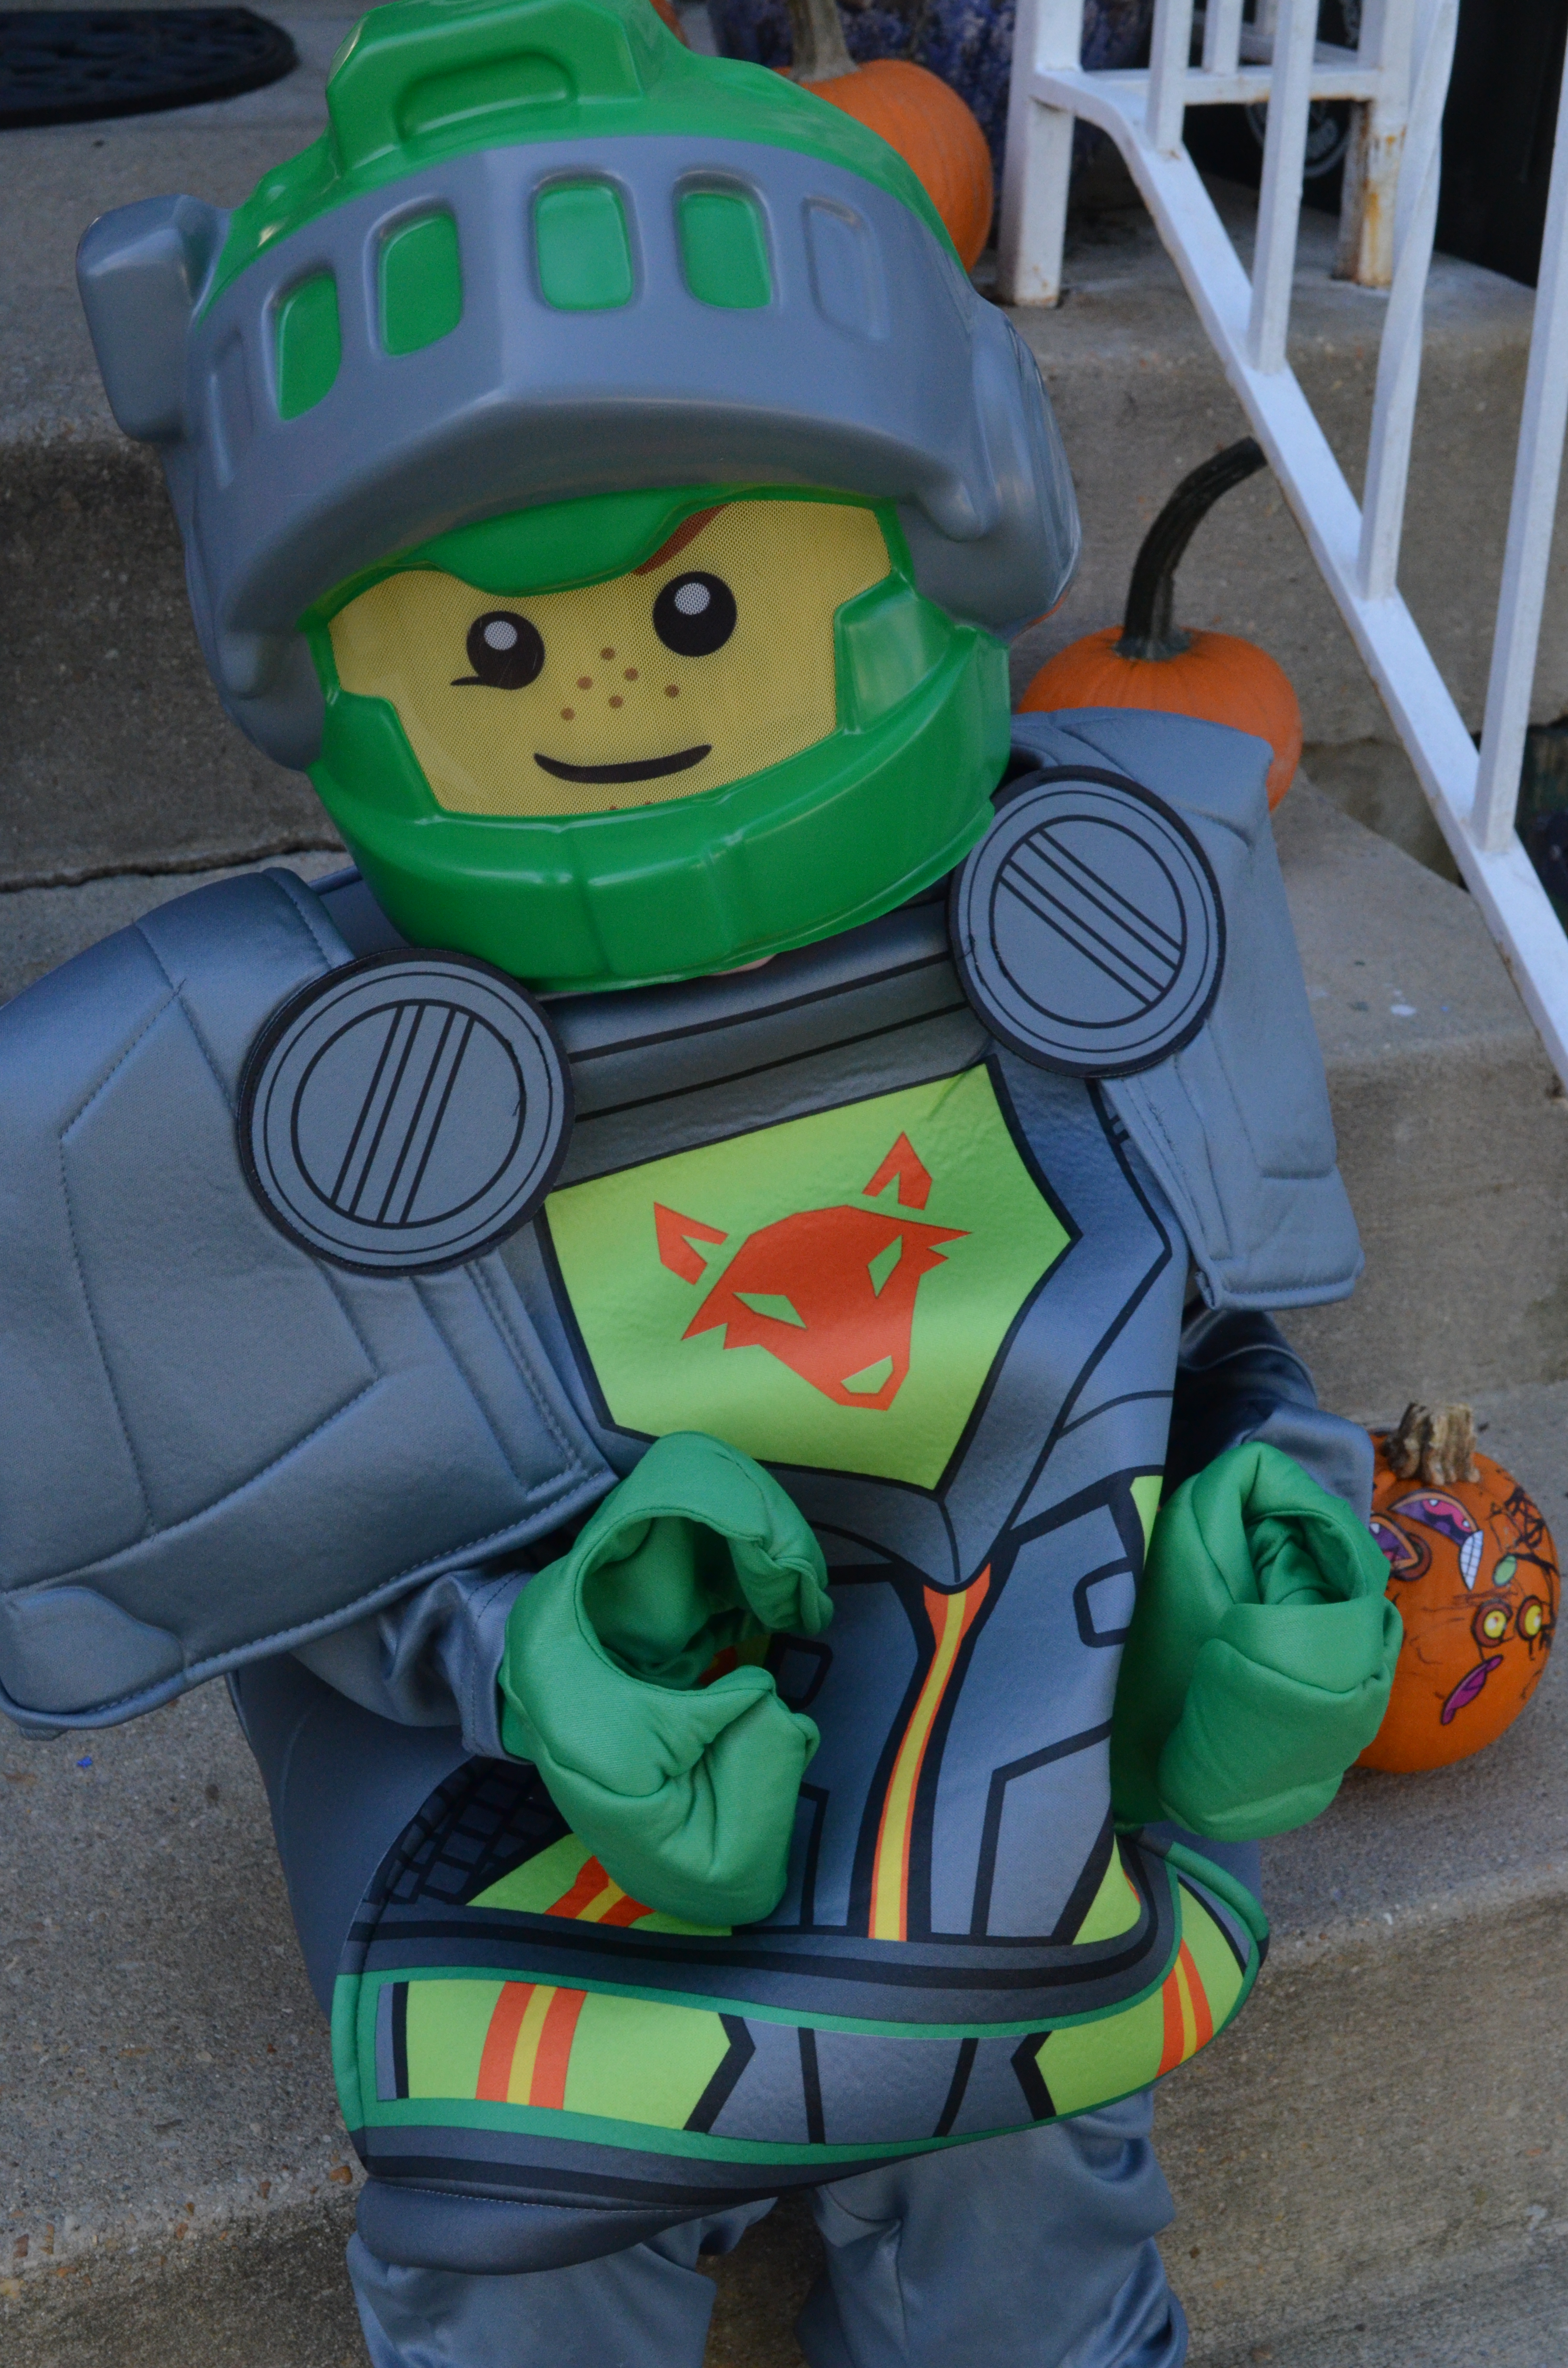 LEGO NEXO KNIGHTS PERFECT DISGUISE FOR THIS HALLOWEEN!